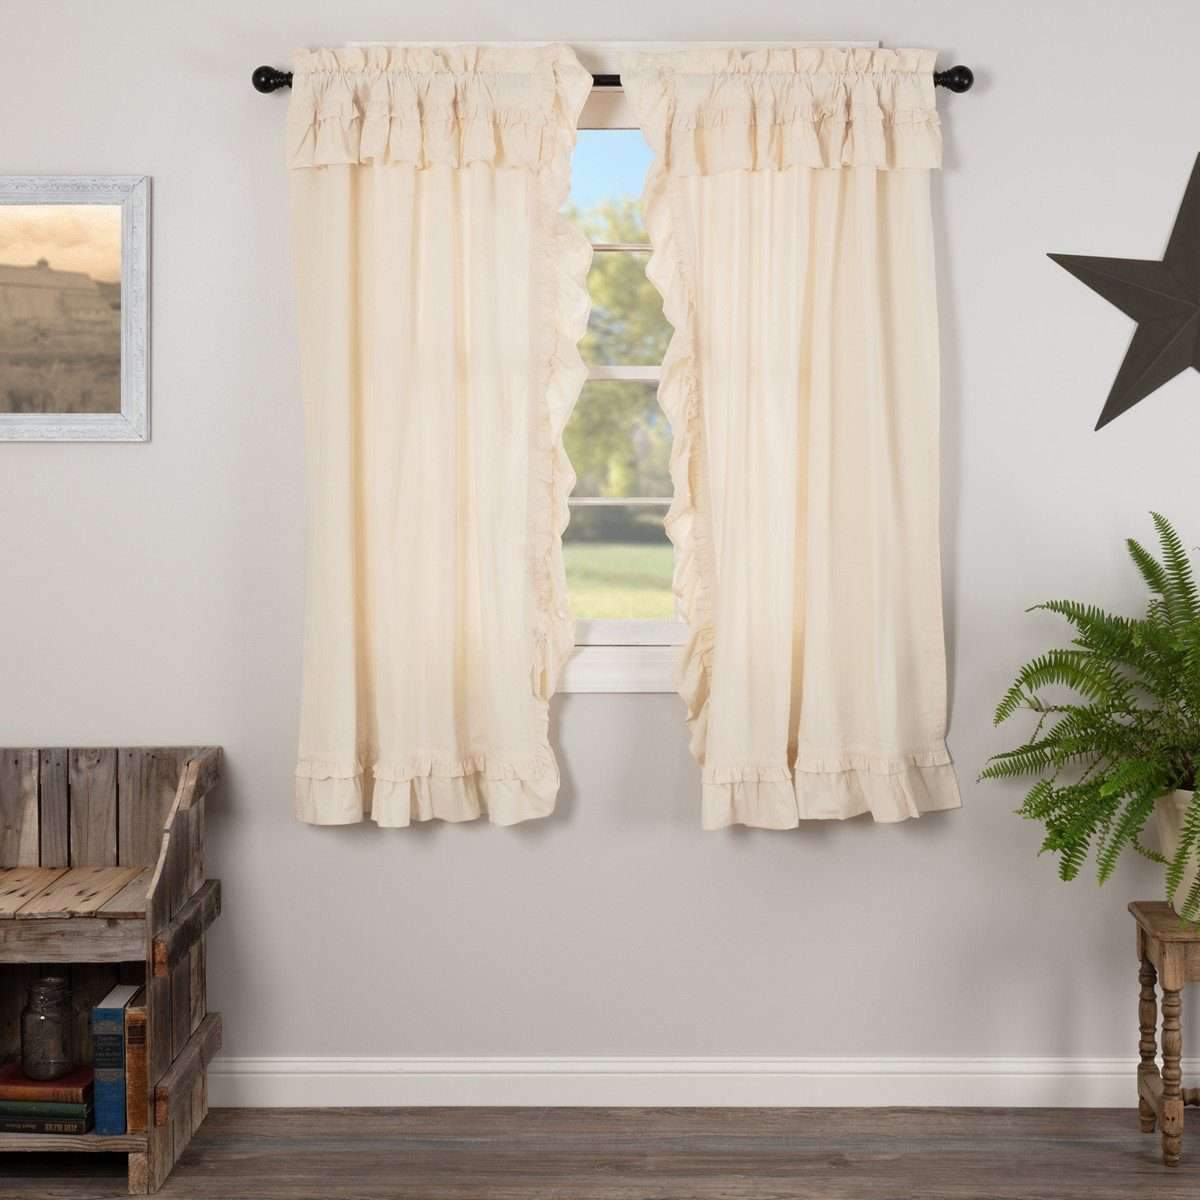 Muslin Ruffled Unbleached Natural Short Panel Curtain Set of 2 63"x36" VHC Brands - The Fox Decor